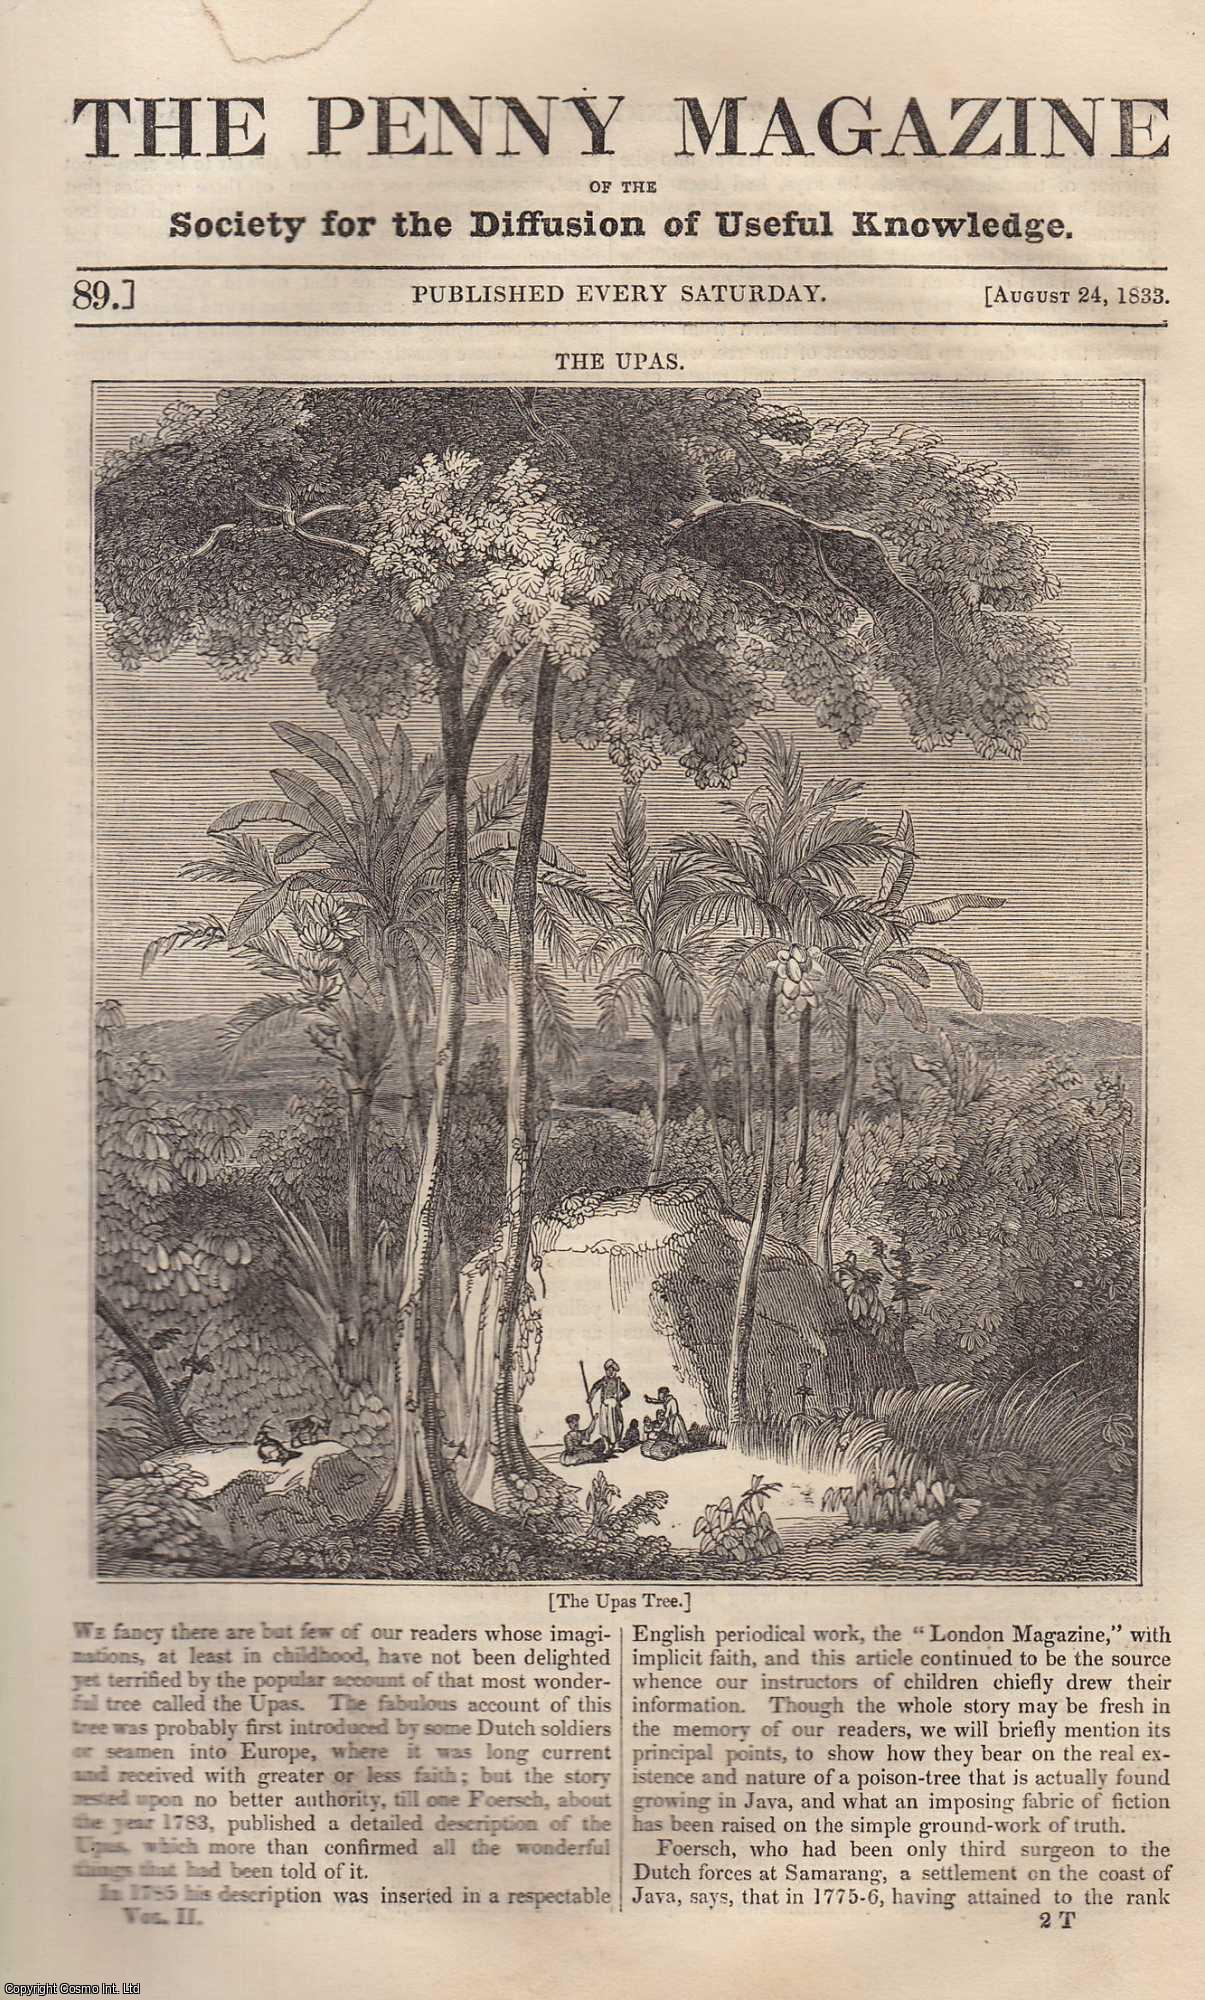 Penny Magazine - The Upas Tree (introduced by Dutch soldiers); Weaving in Ceylon; The Battle of Cressy, 26th August, 1346, etc. Issue No. 89, August 17th, 1833. A complete original weekly issue of the Penny Magazine, 1833.